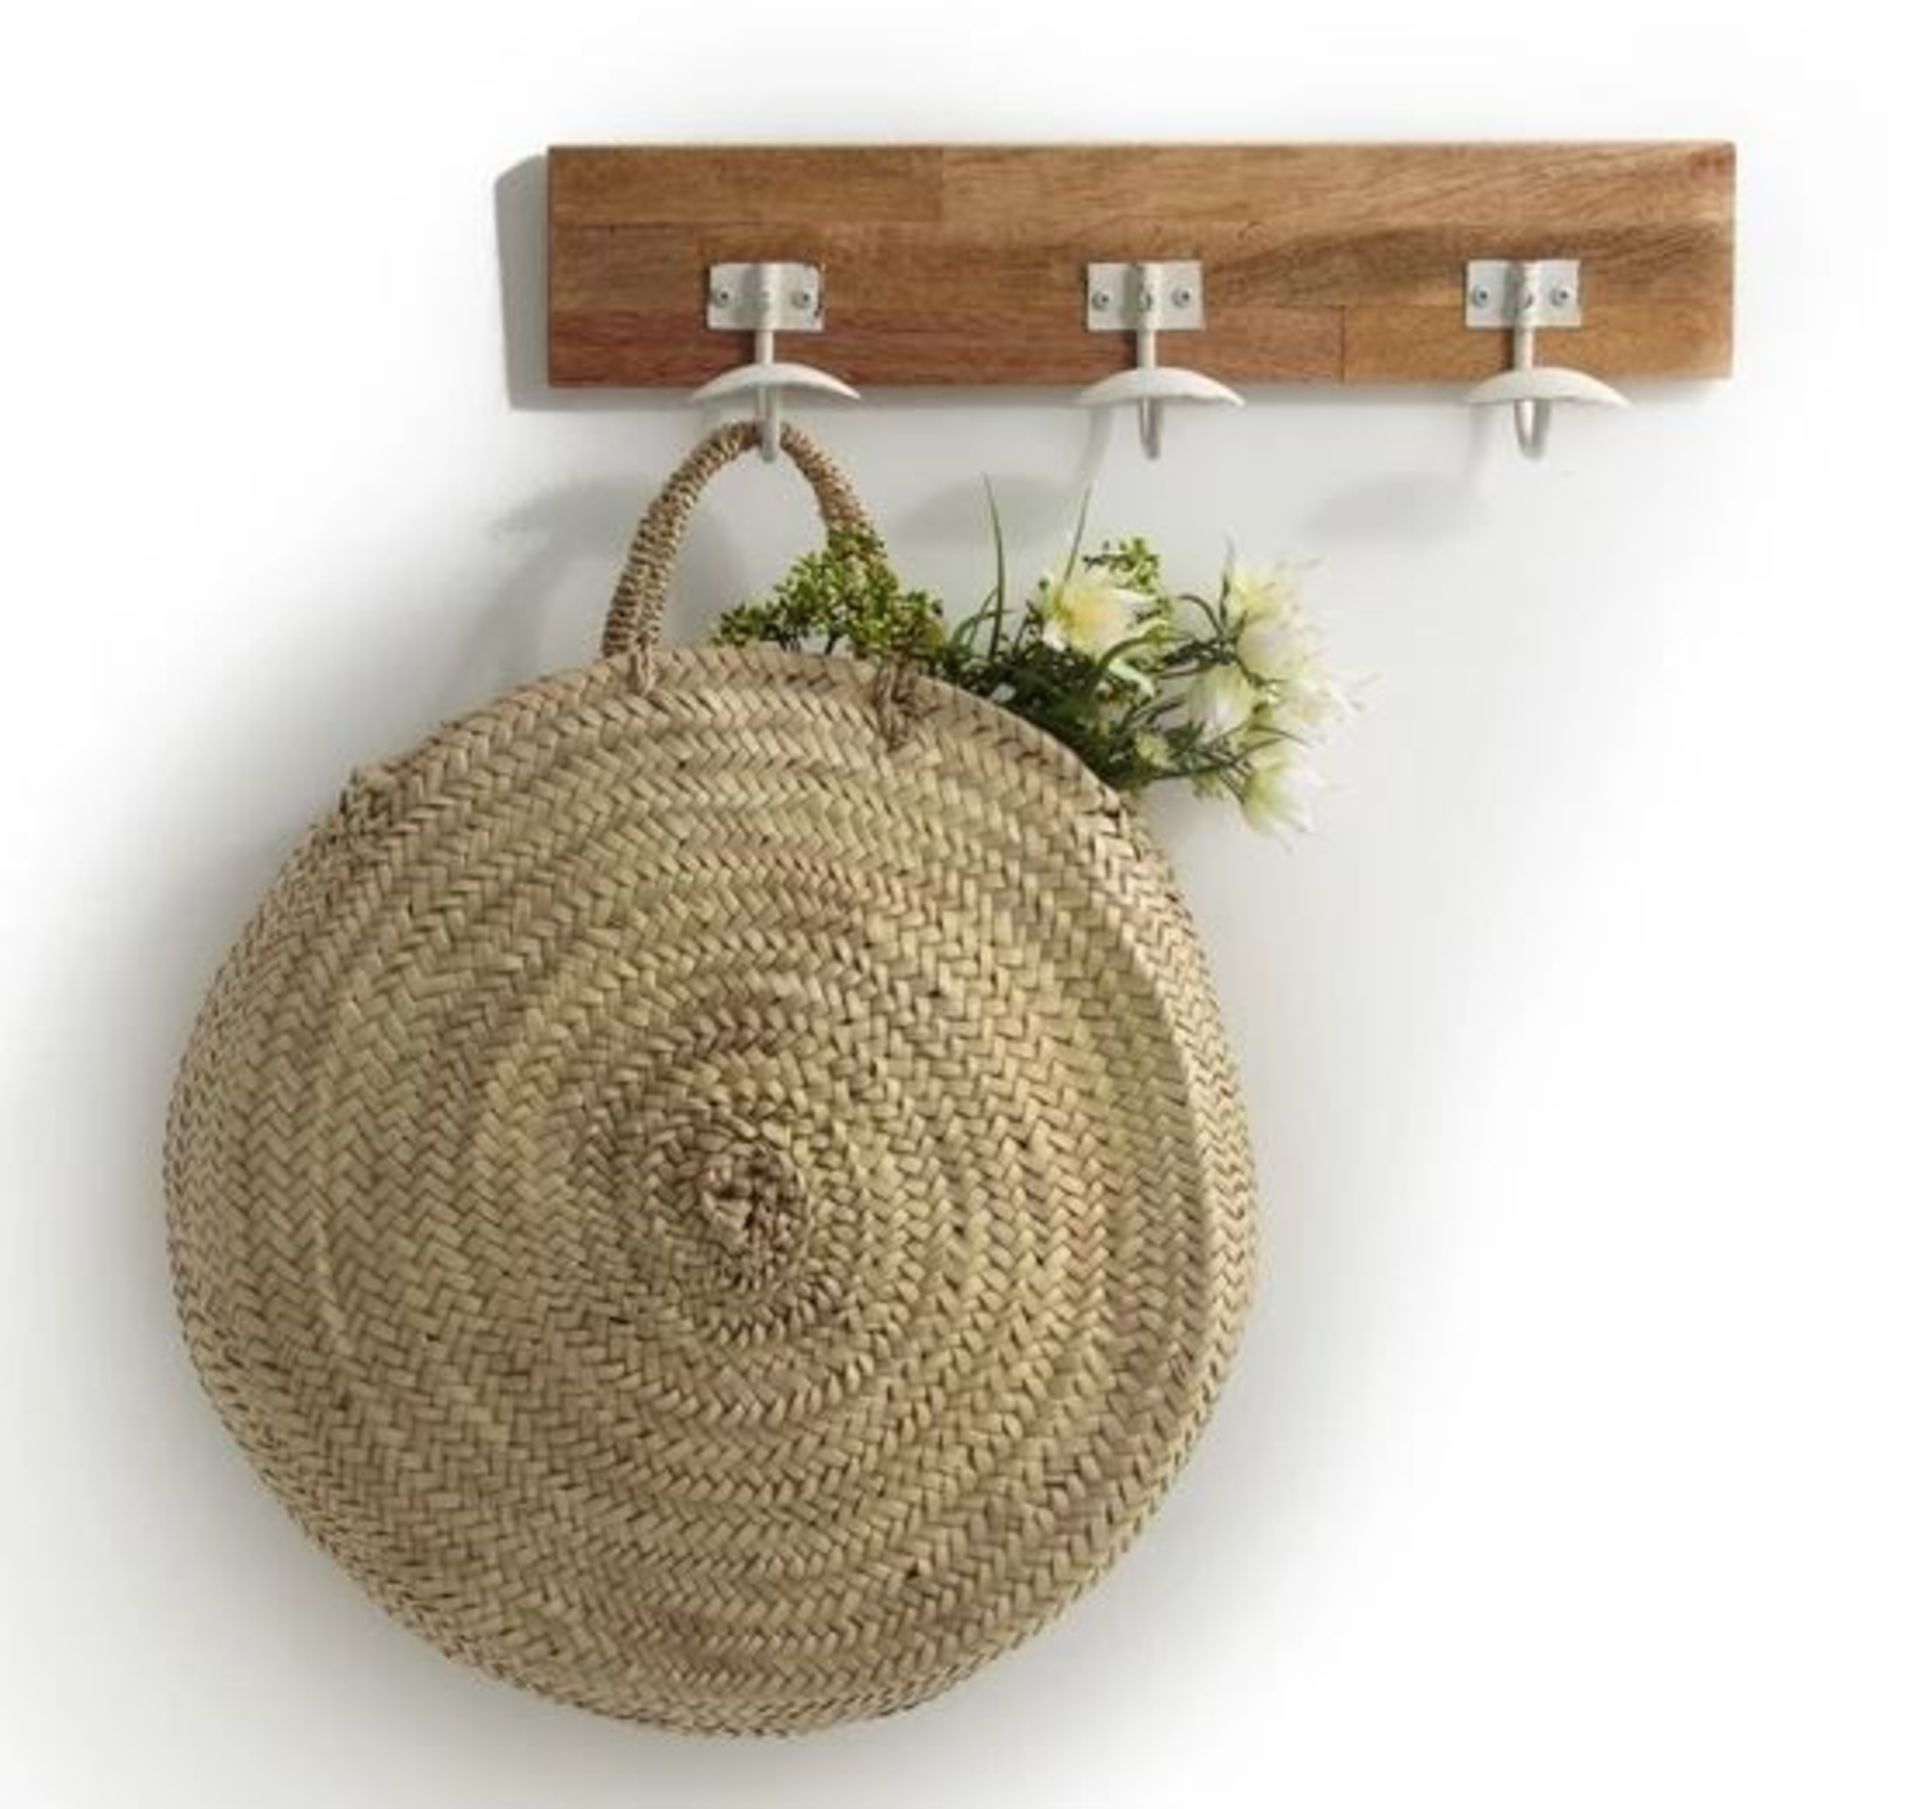 1 X LA REDOUTE HEVEA COAT RACK IN LIGHT NATURAL WOOD AND RUSTIC WHITE 50CM / RRP £40.00 / GRADE A